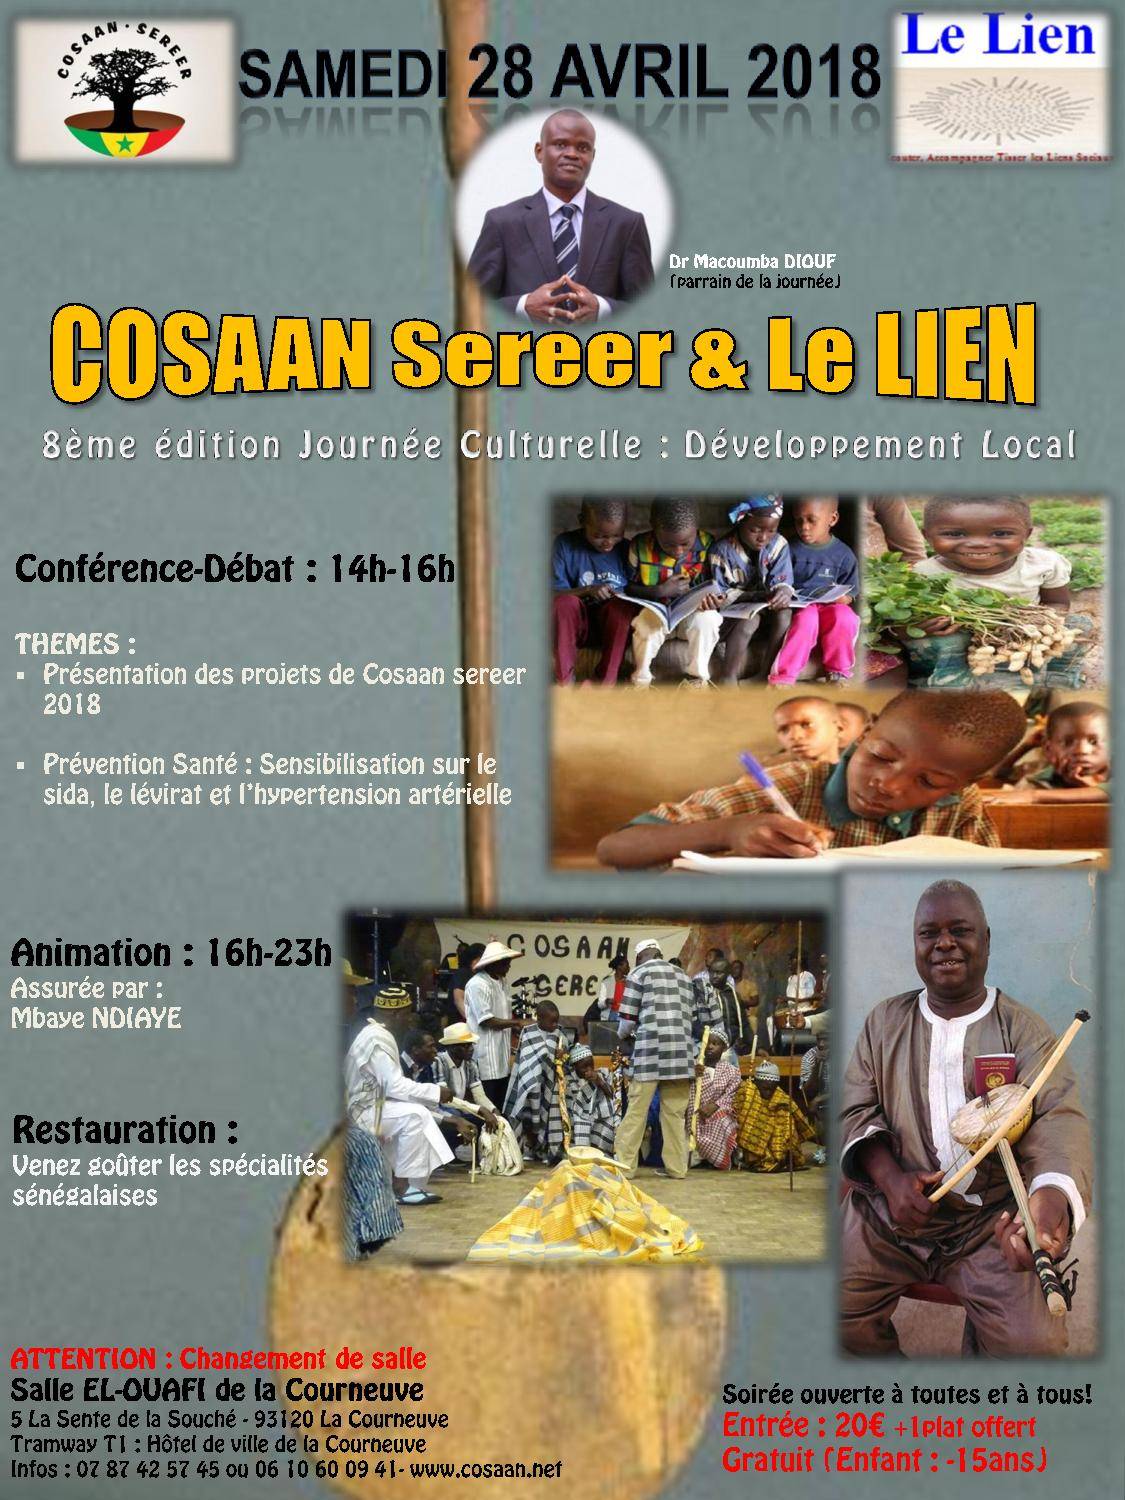 The Cosaan Sereer Association of France annual cultural event with Mbaye Ndiaye (Saturday, 28th April 2018)